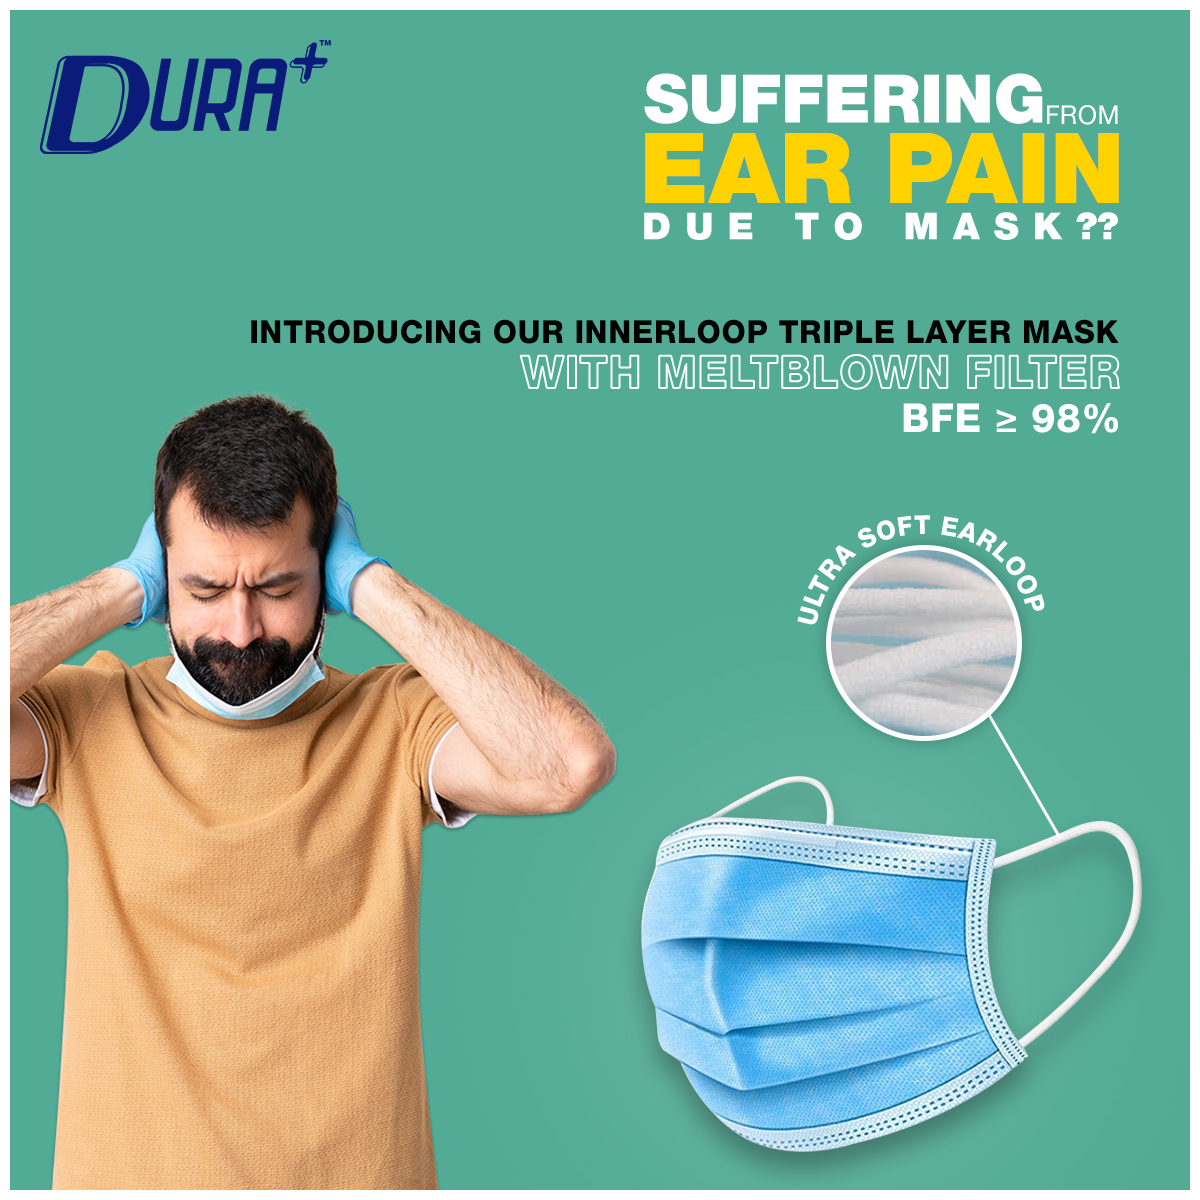 #suffering from #earpain due to #mask??
#Introducing Our #innerloop triple layer mask With Anti-Bacterial #MeltblownFilter
BFE ≥ 98%
Buy Today On #Amazon
tinyurl.com/duraplus
Call us for more queries at +91 9311350110
#Mydura #Duraplus #duraplushealthcare #meltblown #wearmask